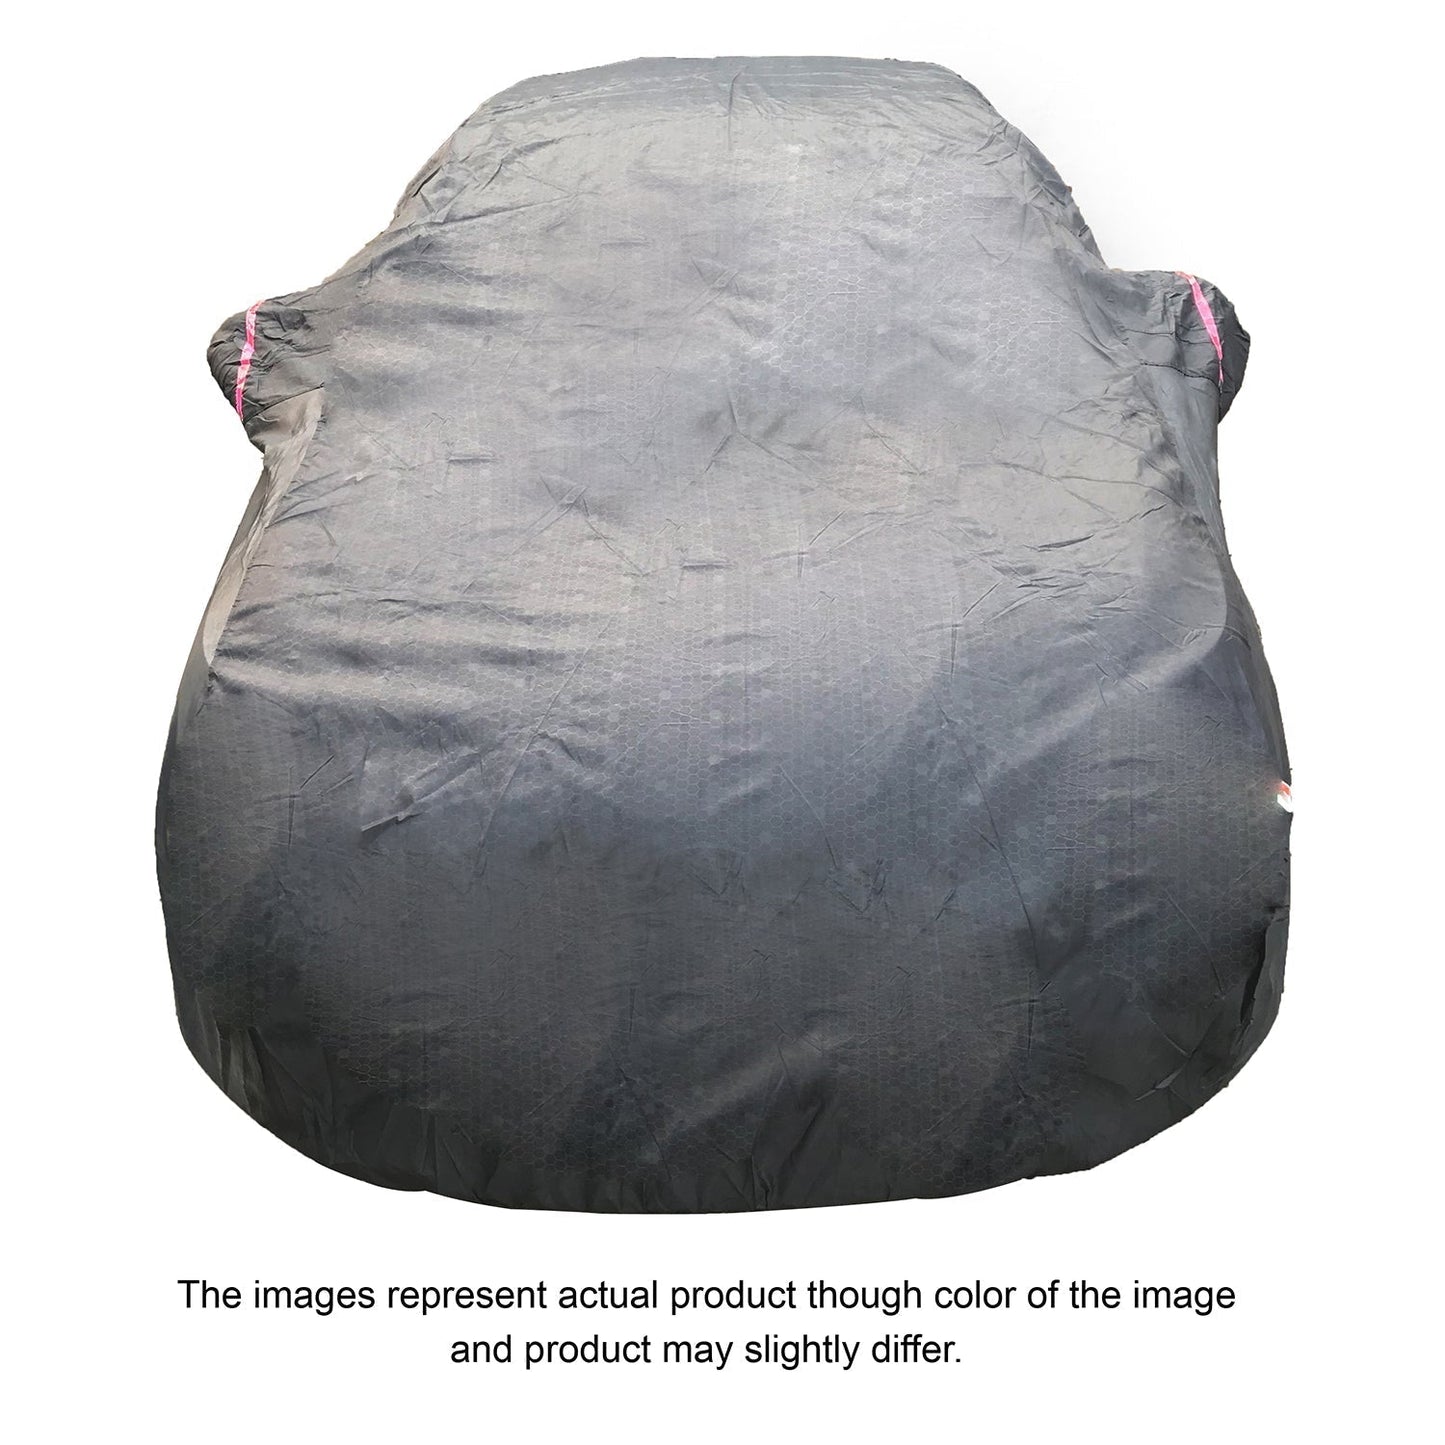 Oshotto 100% Dust Proof, Water Resistant Grey Car Body Cover with Mirror Pocket For Mahindra Thar